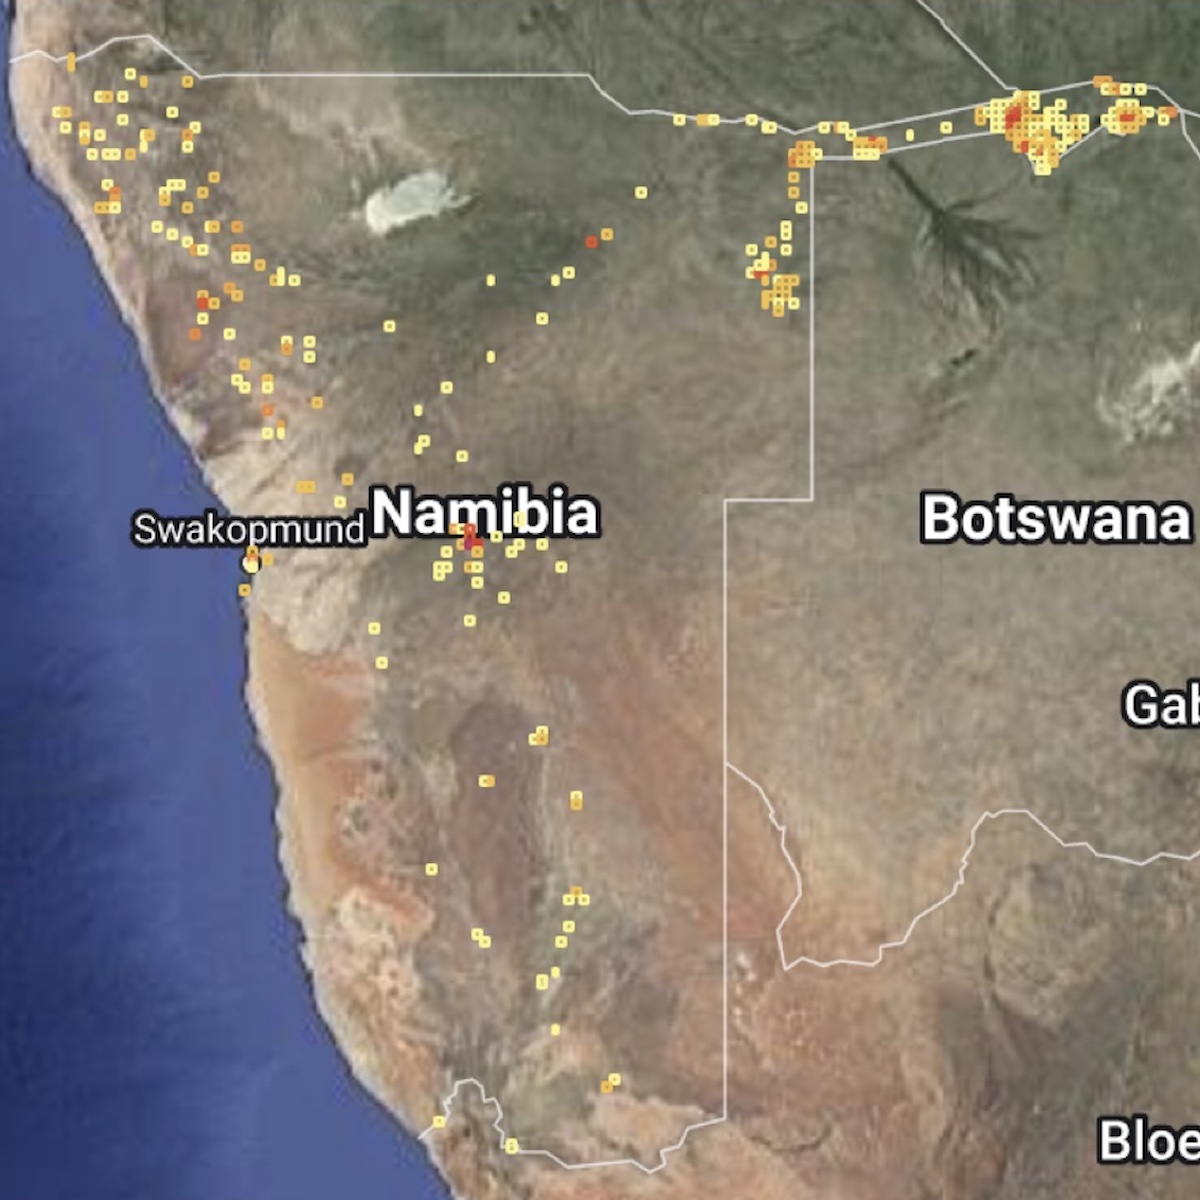 A map of Namibia showing sightings all over, but especially in the Zambezi region.